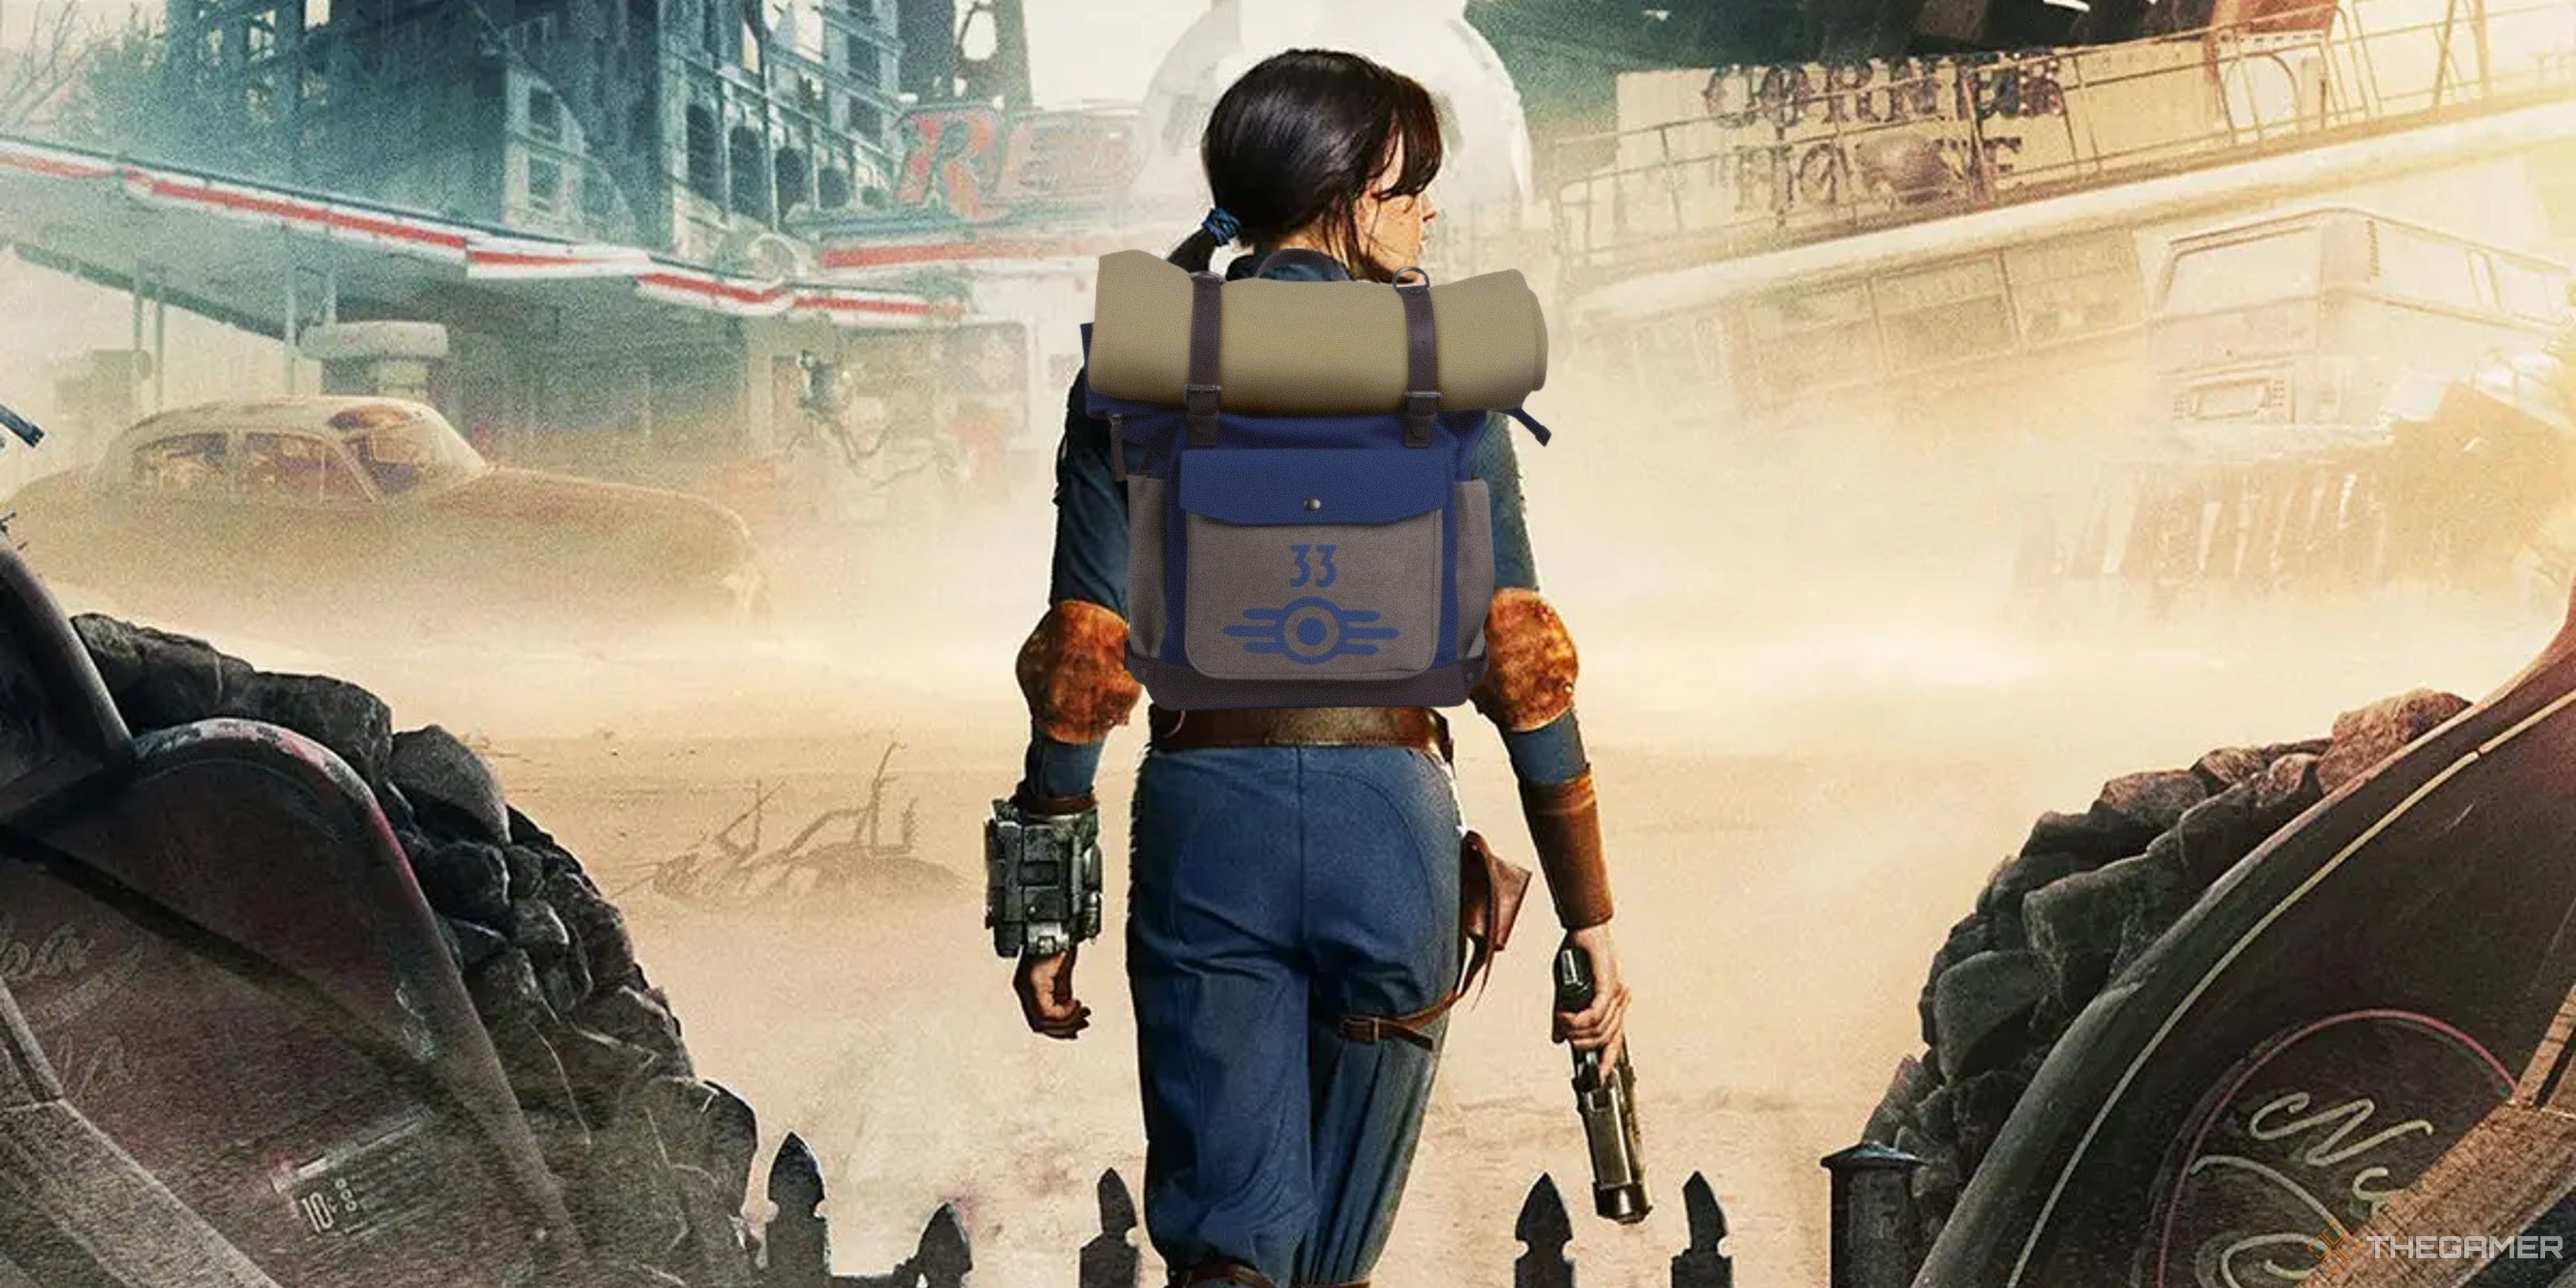 lucy from fallout wearing a vault 33 backpack